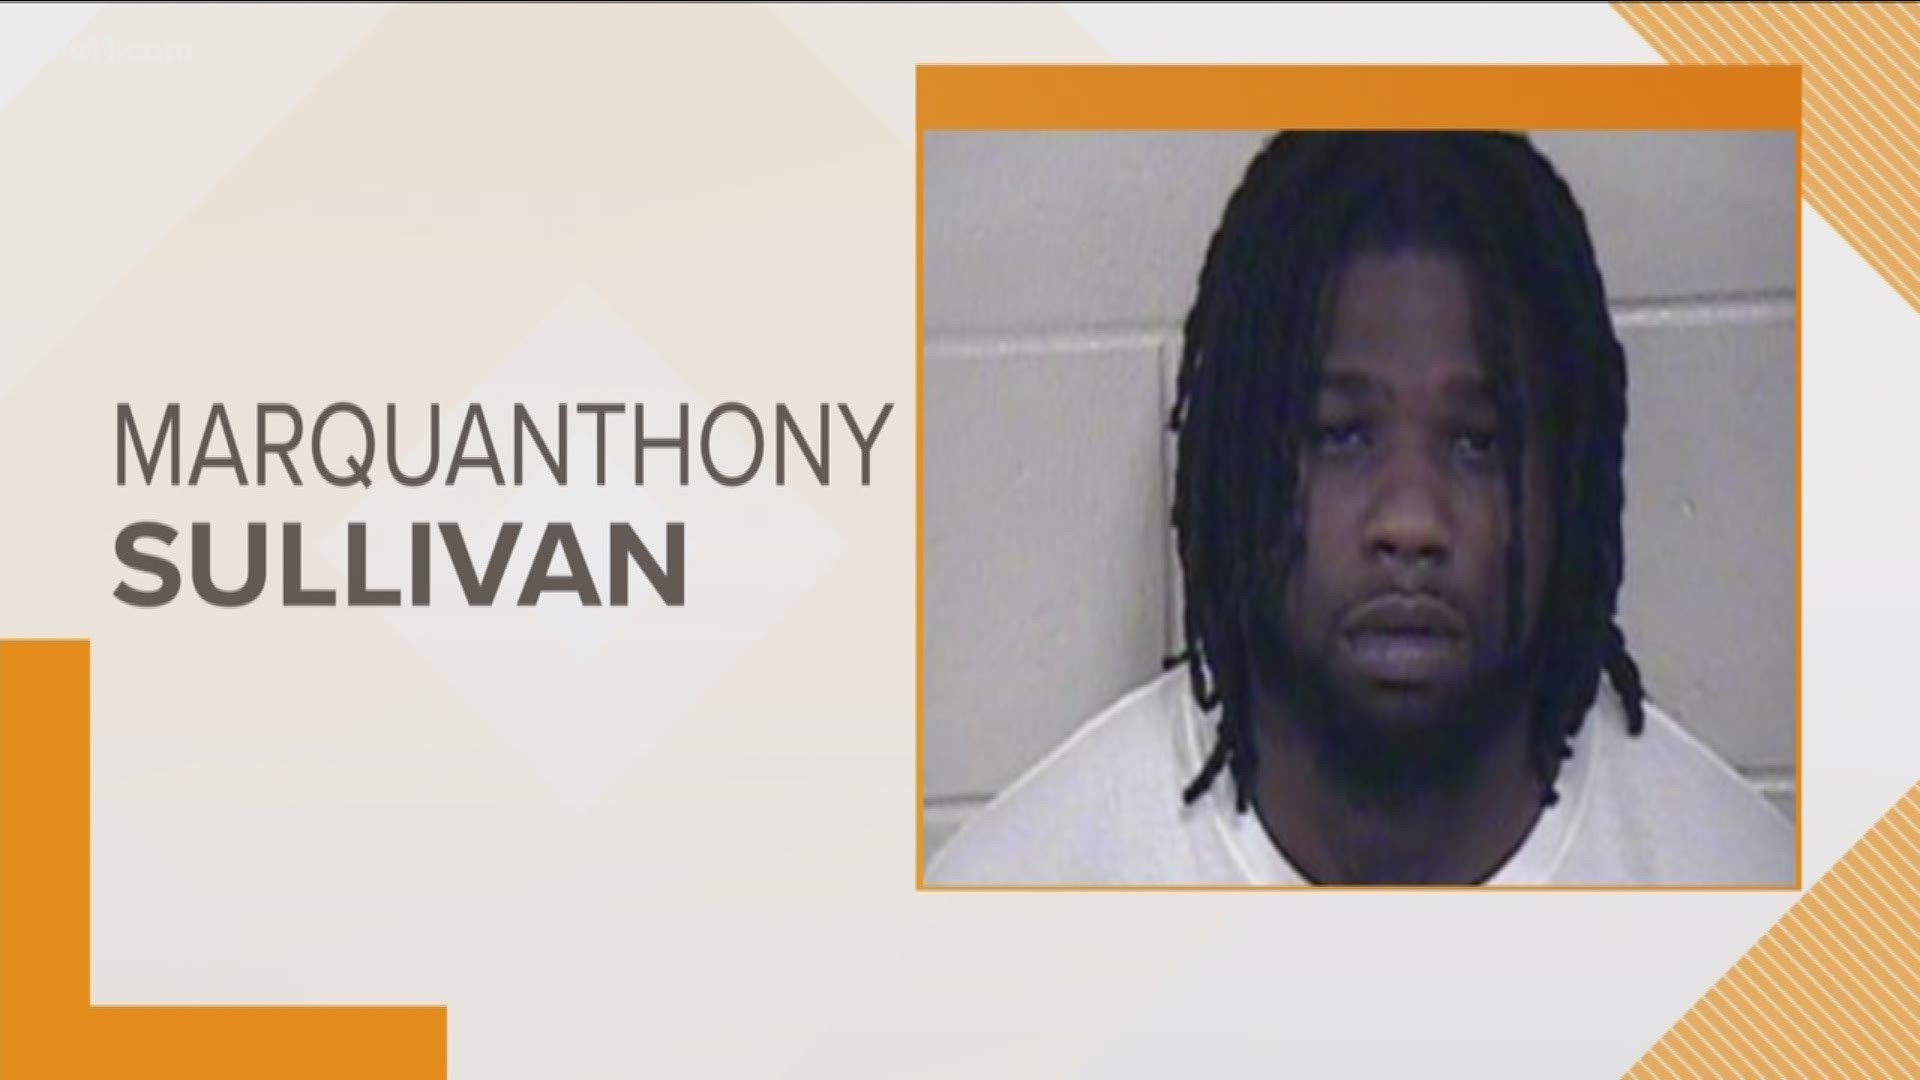 Marquanthony Sullivan was arrested in Missouri in connection to a murder in March in Pine Bluff.